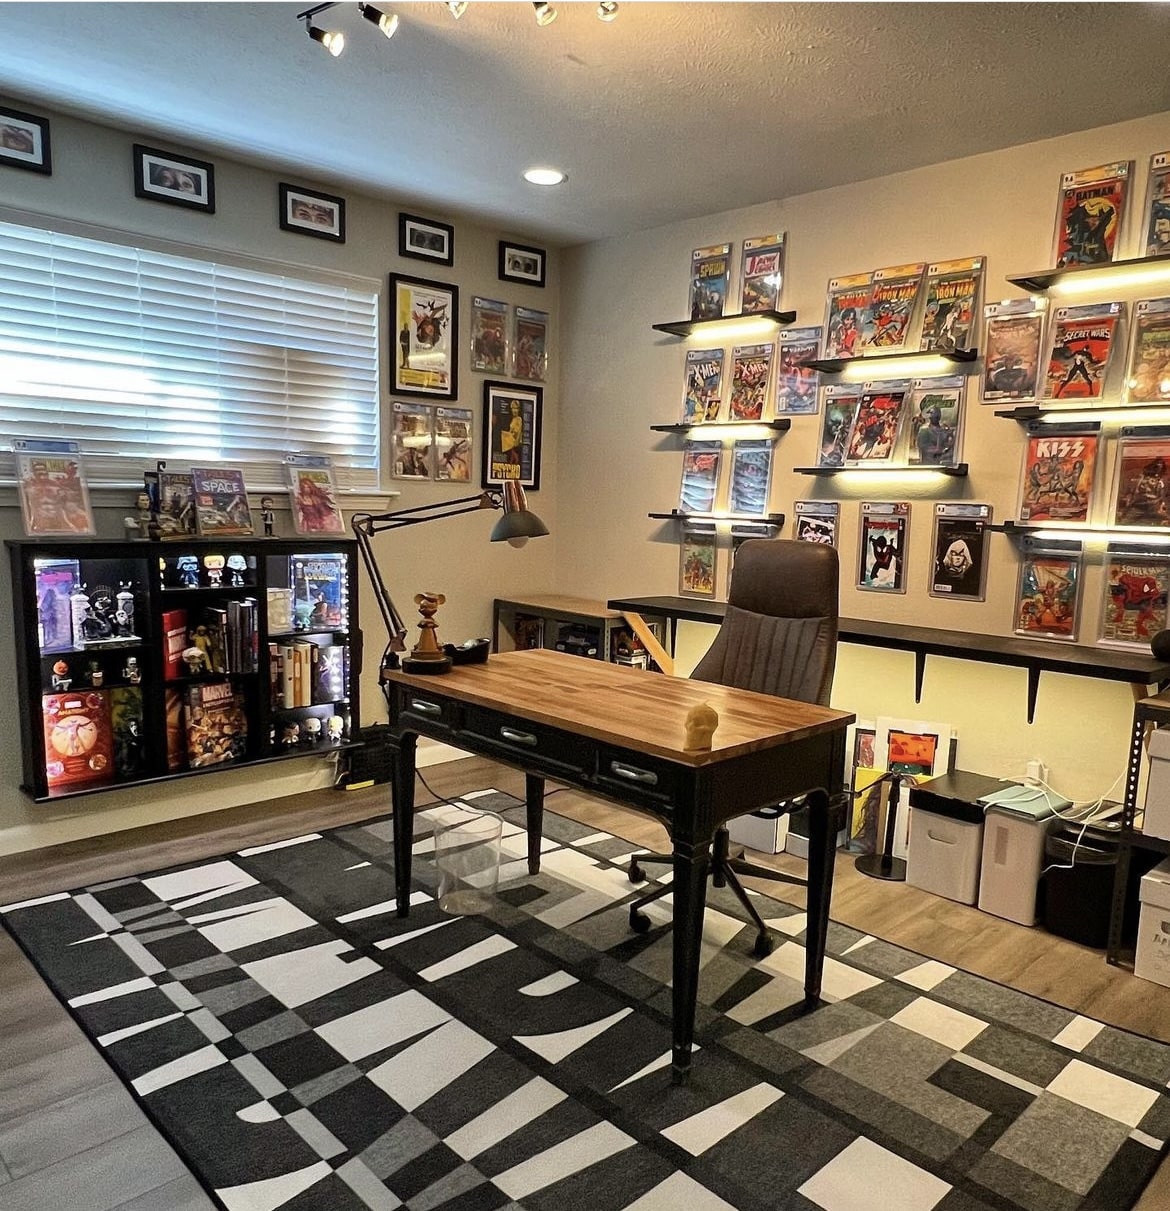 5 Steps to Make a Small Man Cave on a Budget | Bloom in the Black